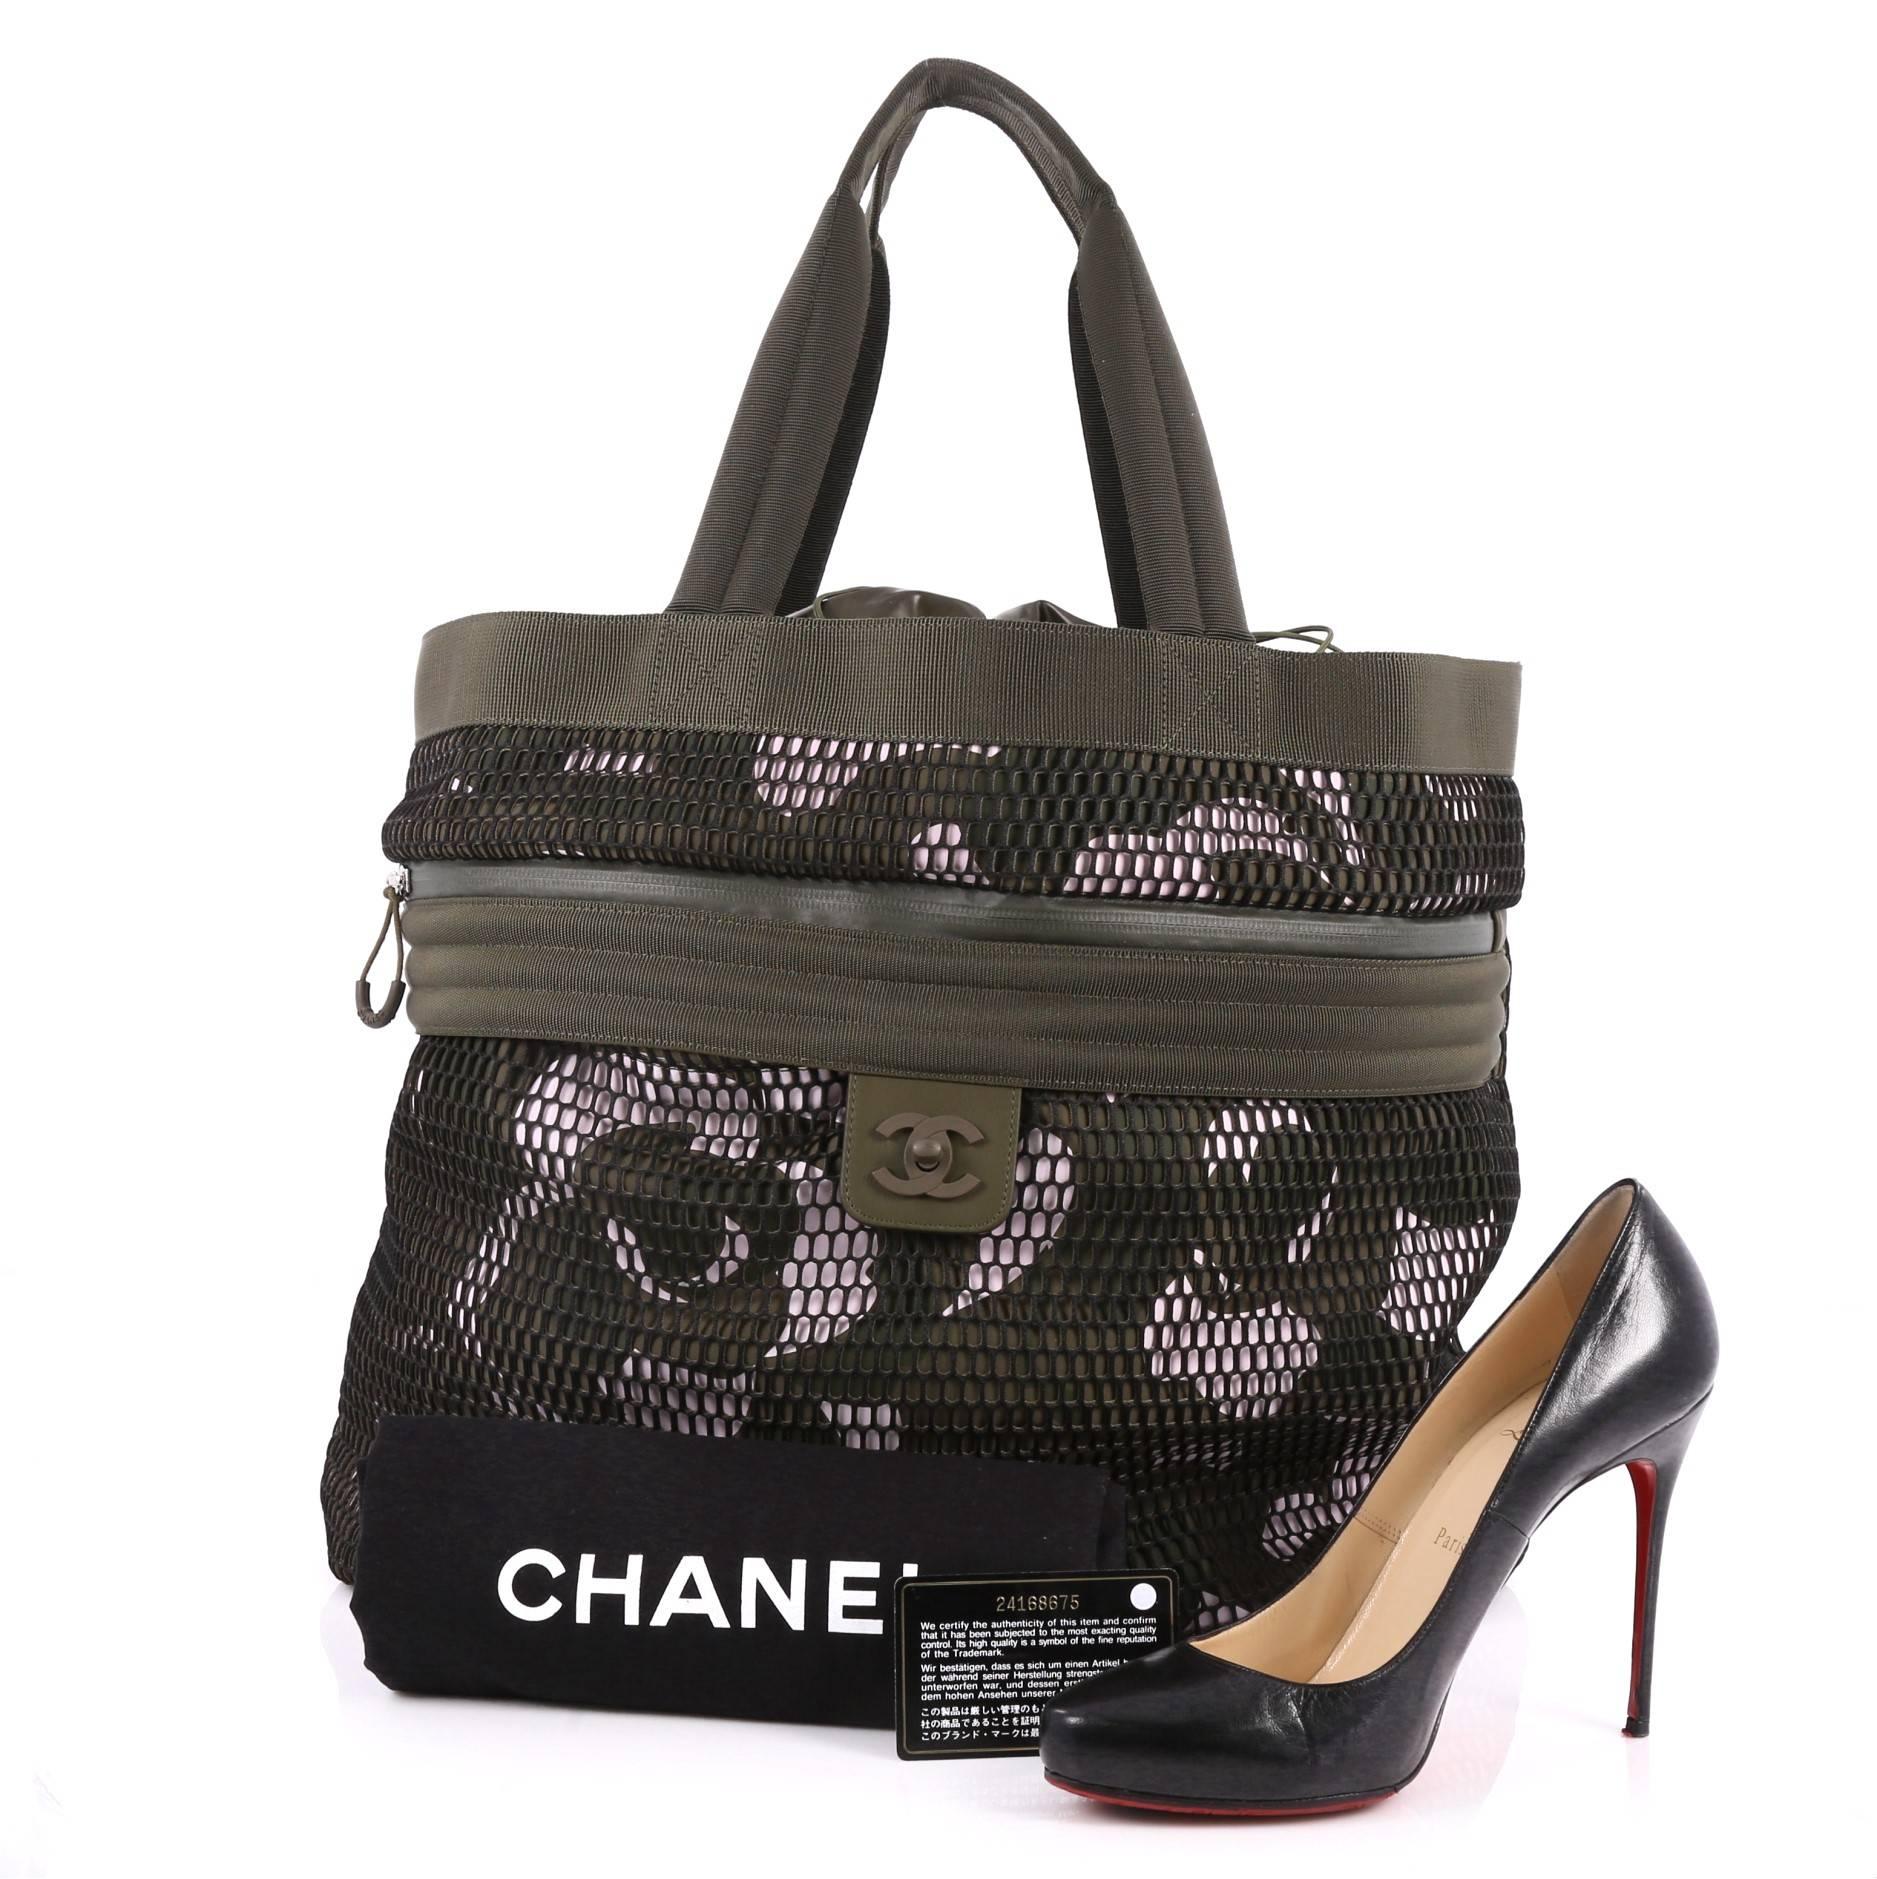 This authentic Chanel Sporty Shopping Tote Printed Neoprene with Mesh Large is from the bags Pre-Collection Spring 2017. Crafted in olive green printed neoprene with mesh, this bag features dual top handles, exterior zip pocket, exterior slip pocket